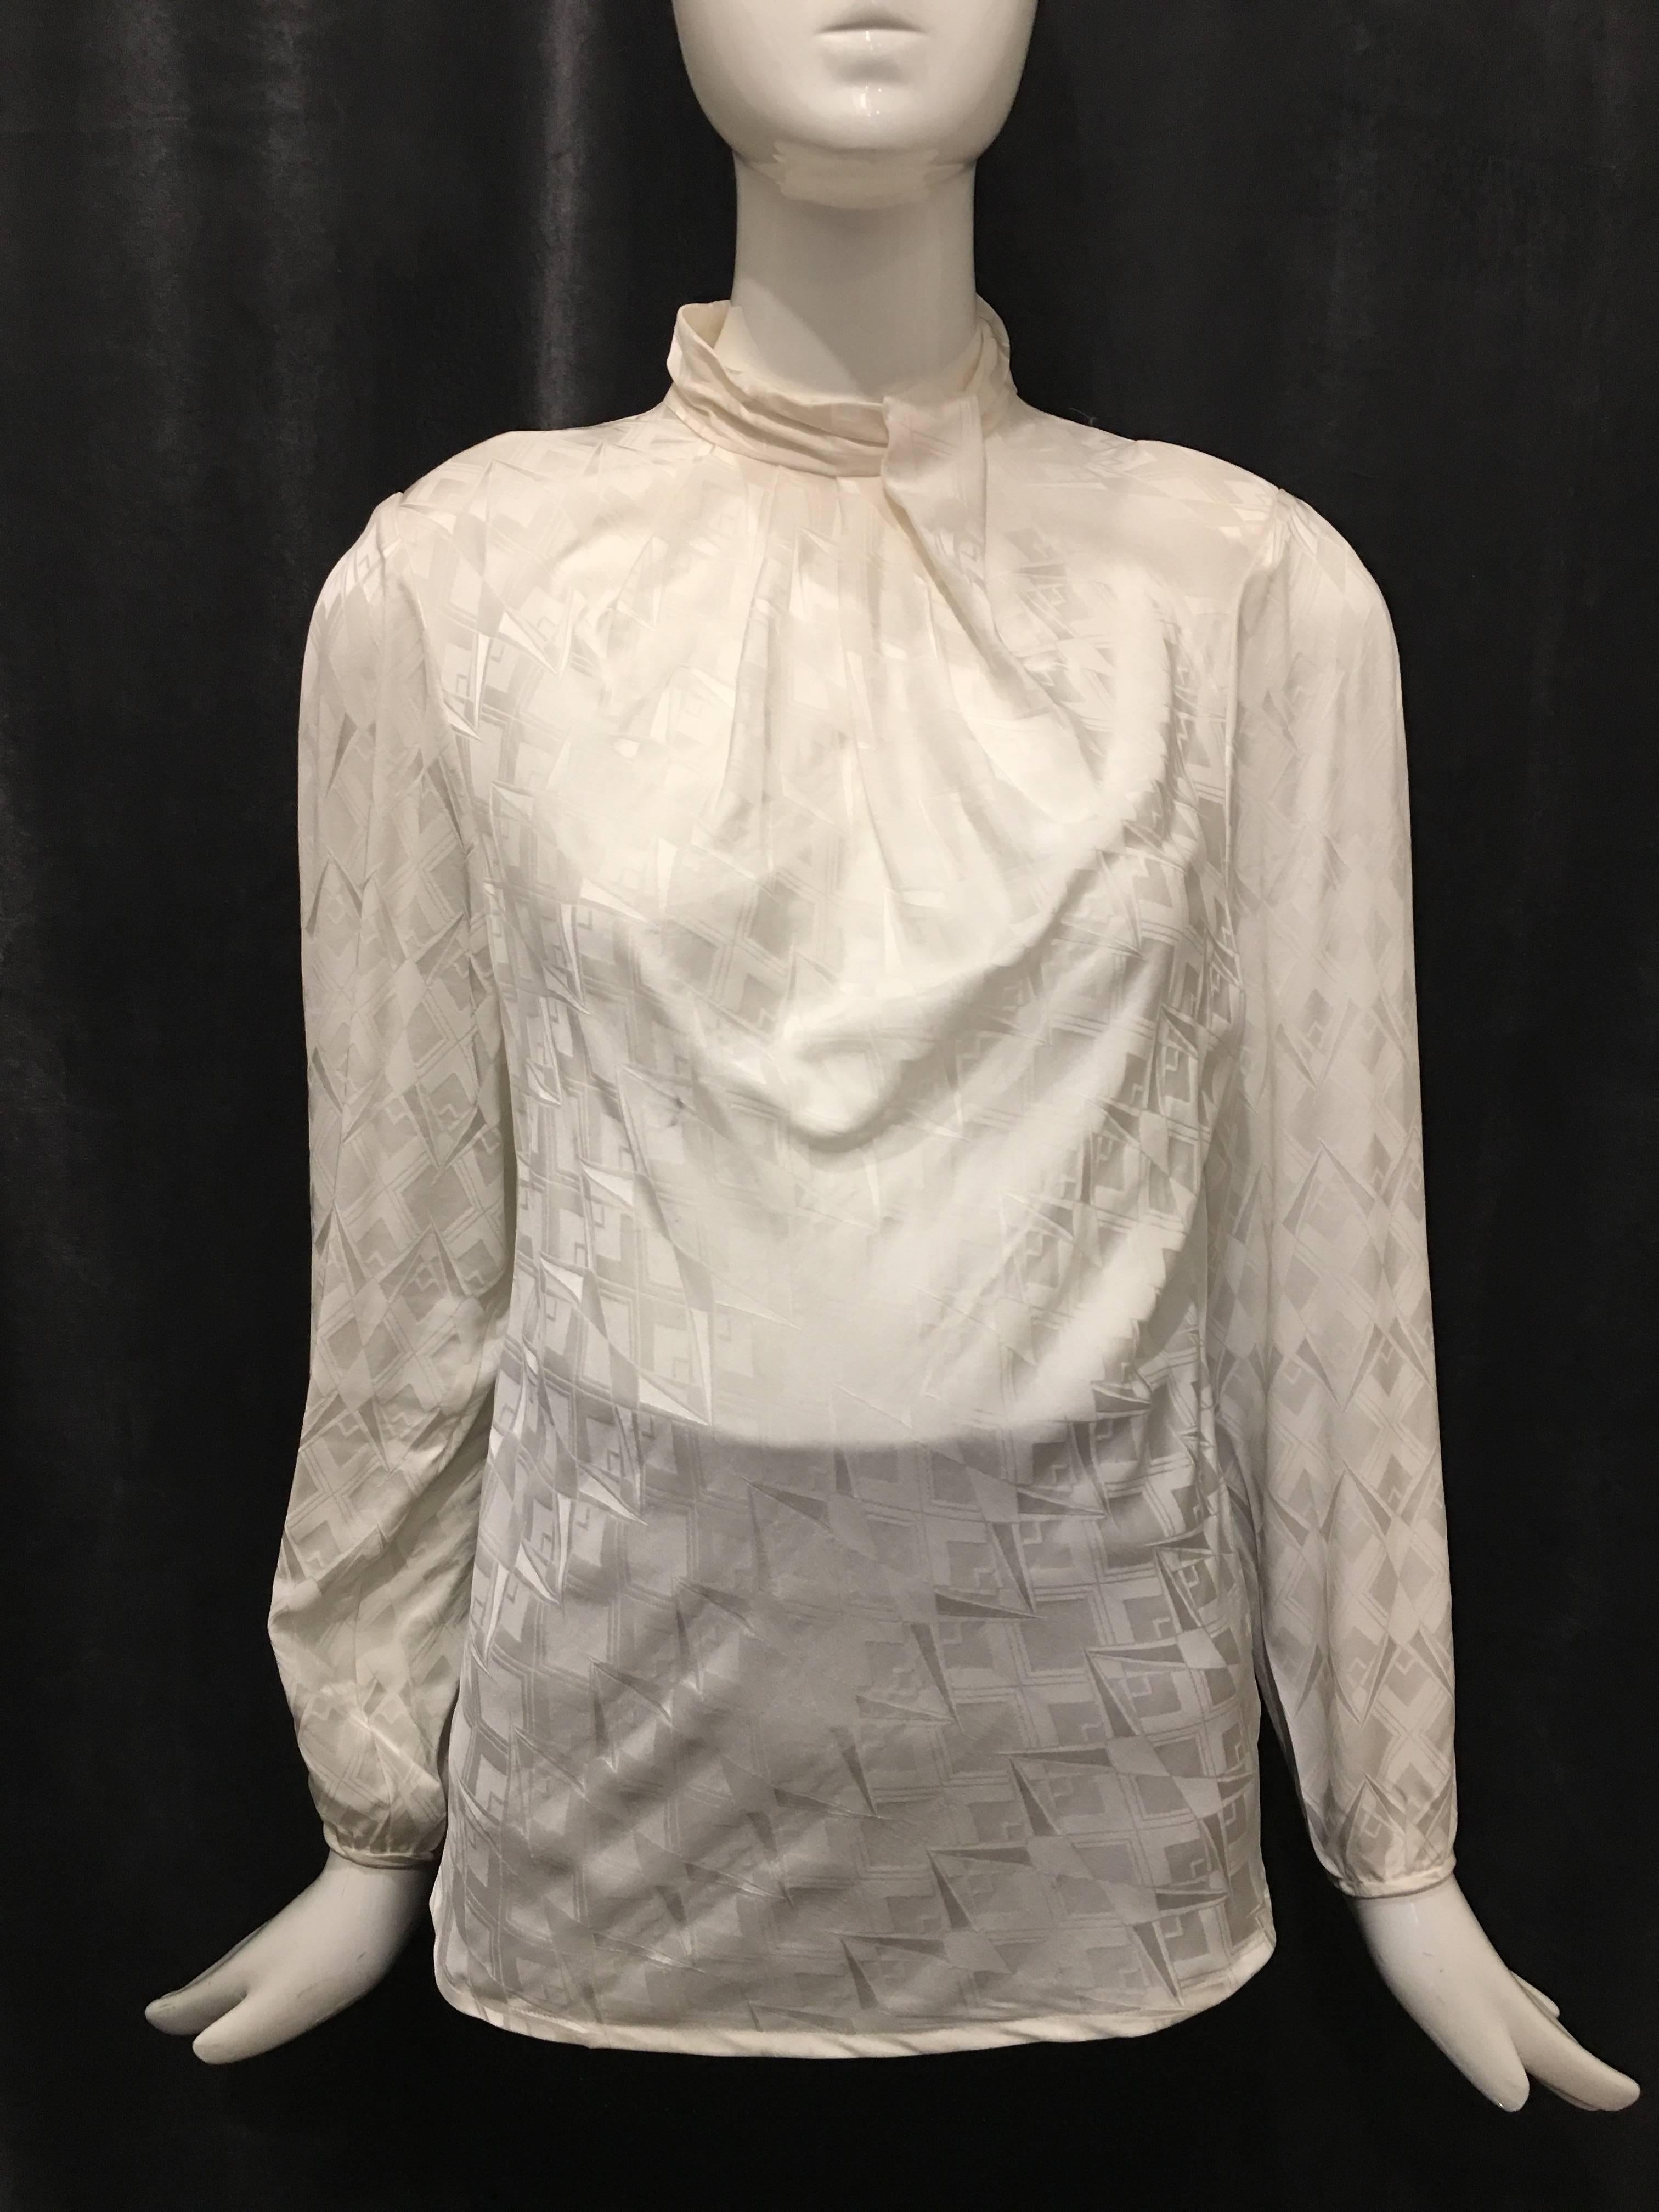 White silk blouse with all-over abstract design. Single buttons at wrists of each sleeve. Wrists are slightly gathered. Three buttons at back neckline with keyhole below. Seam down back of blouse. Slight pleating at front neckline. Slight shoulder